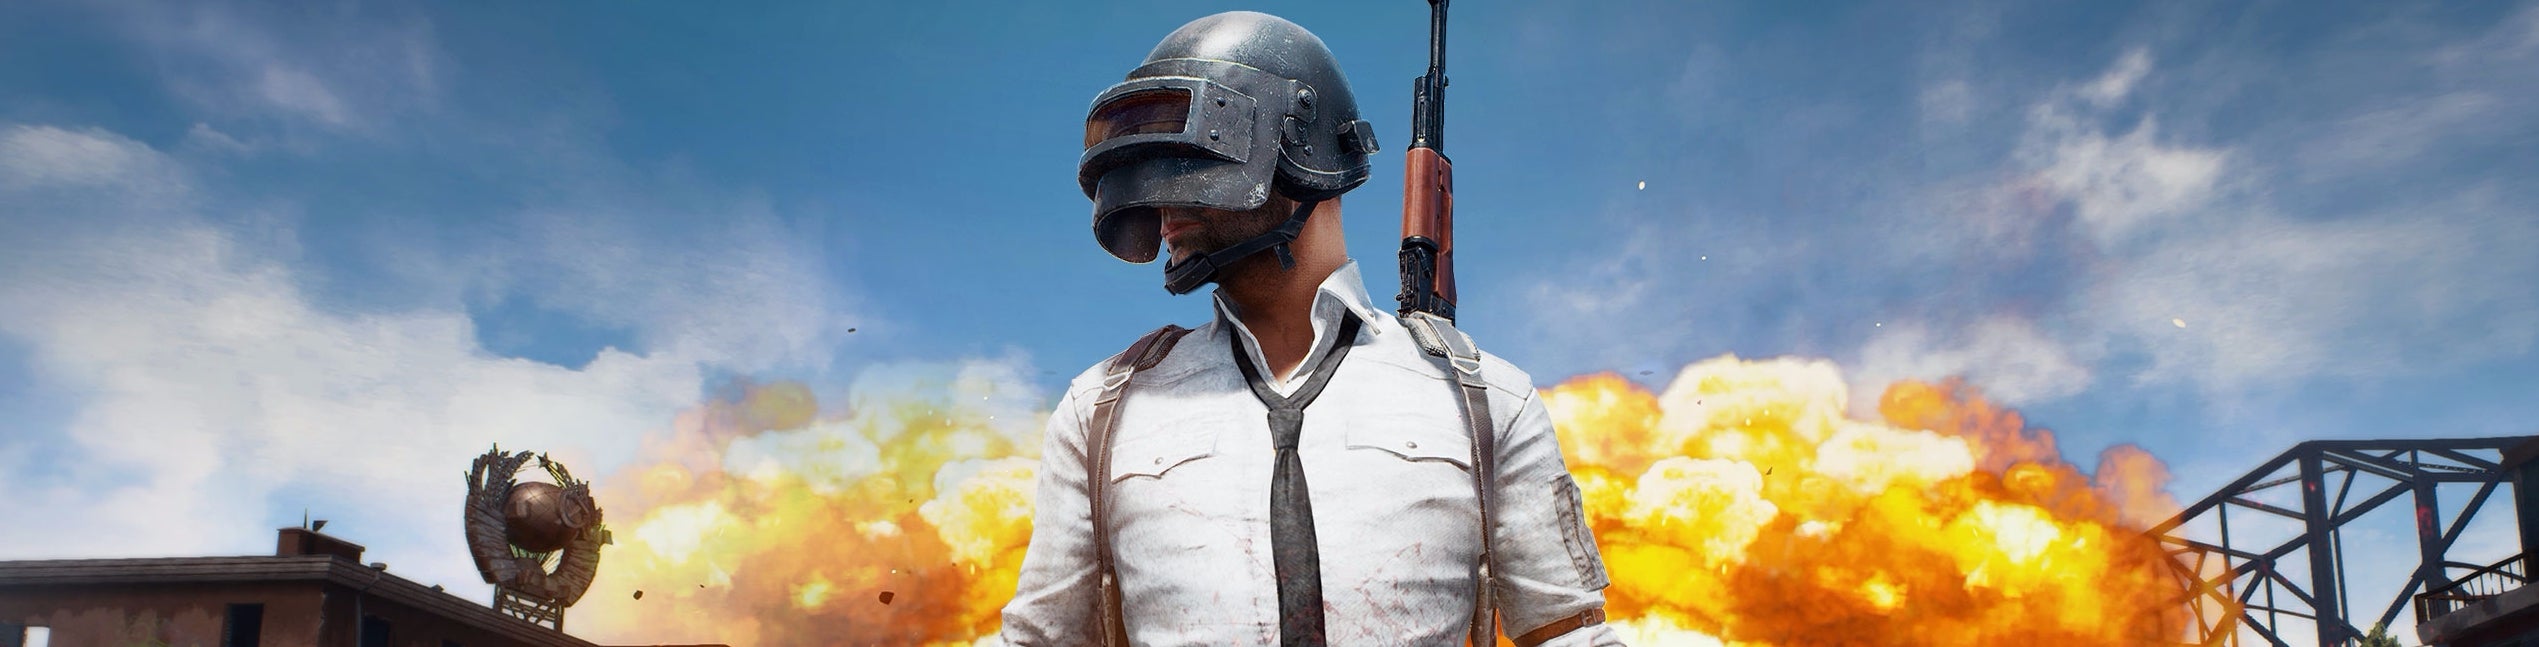 Image for RECENZE PlayerUnknown's Battlegrounds PC 1.0